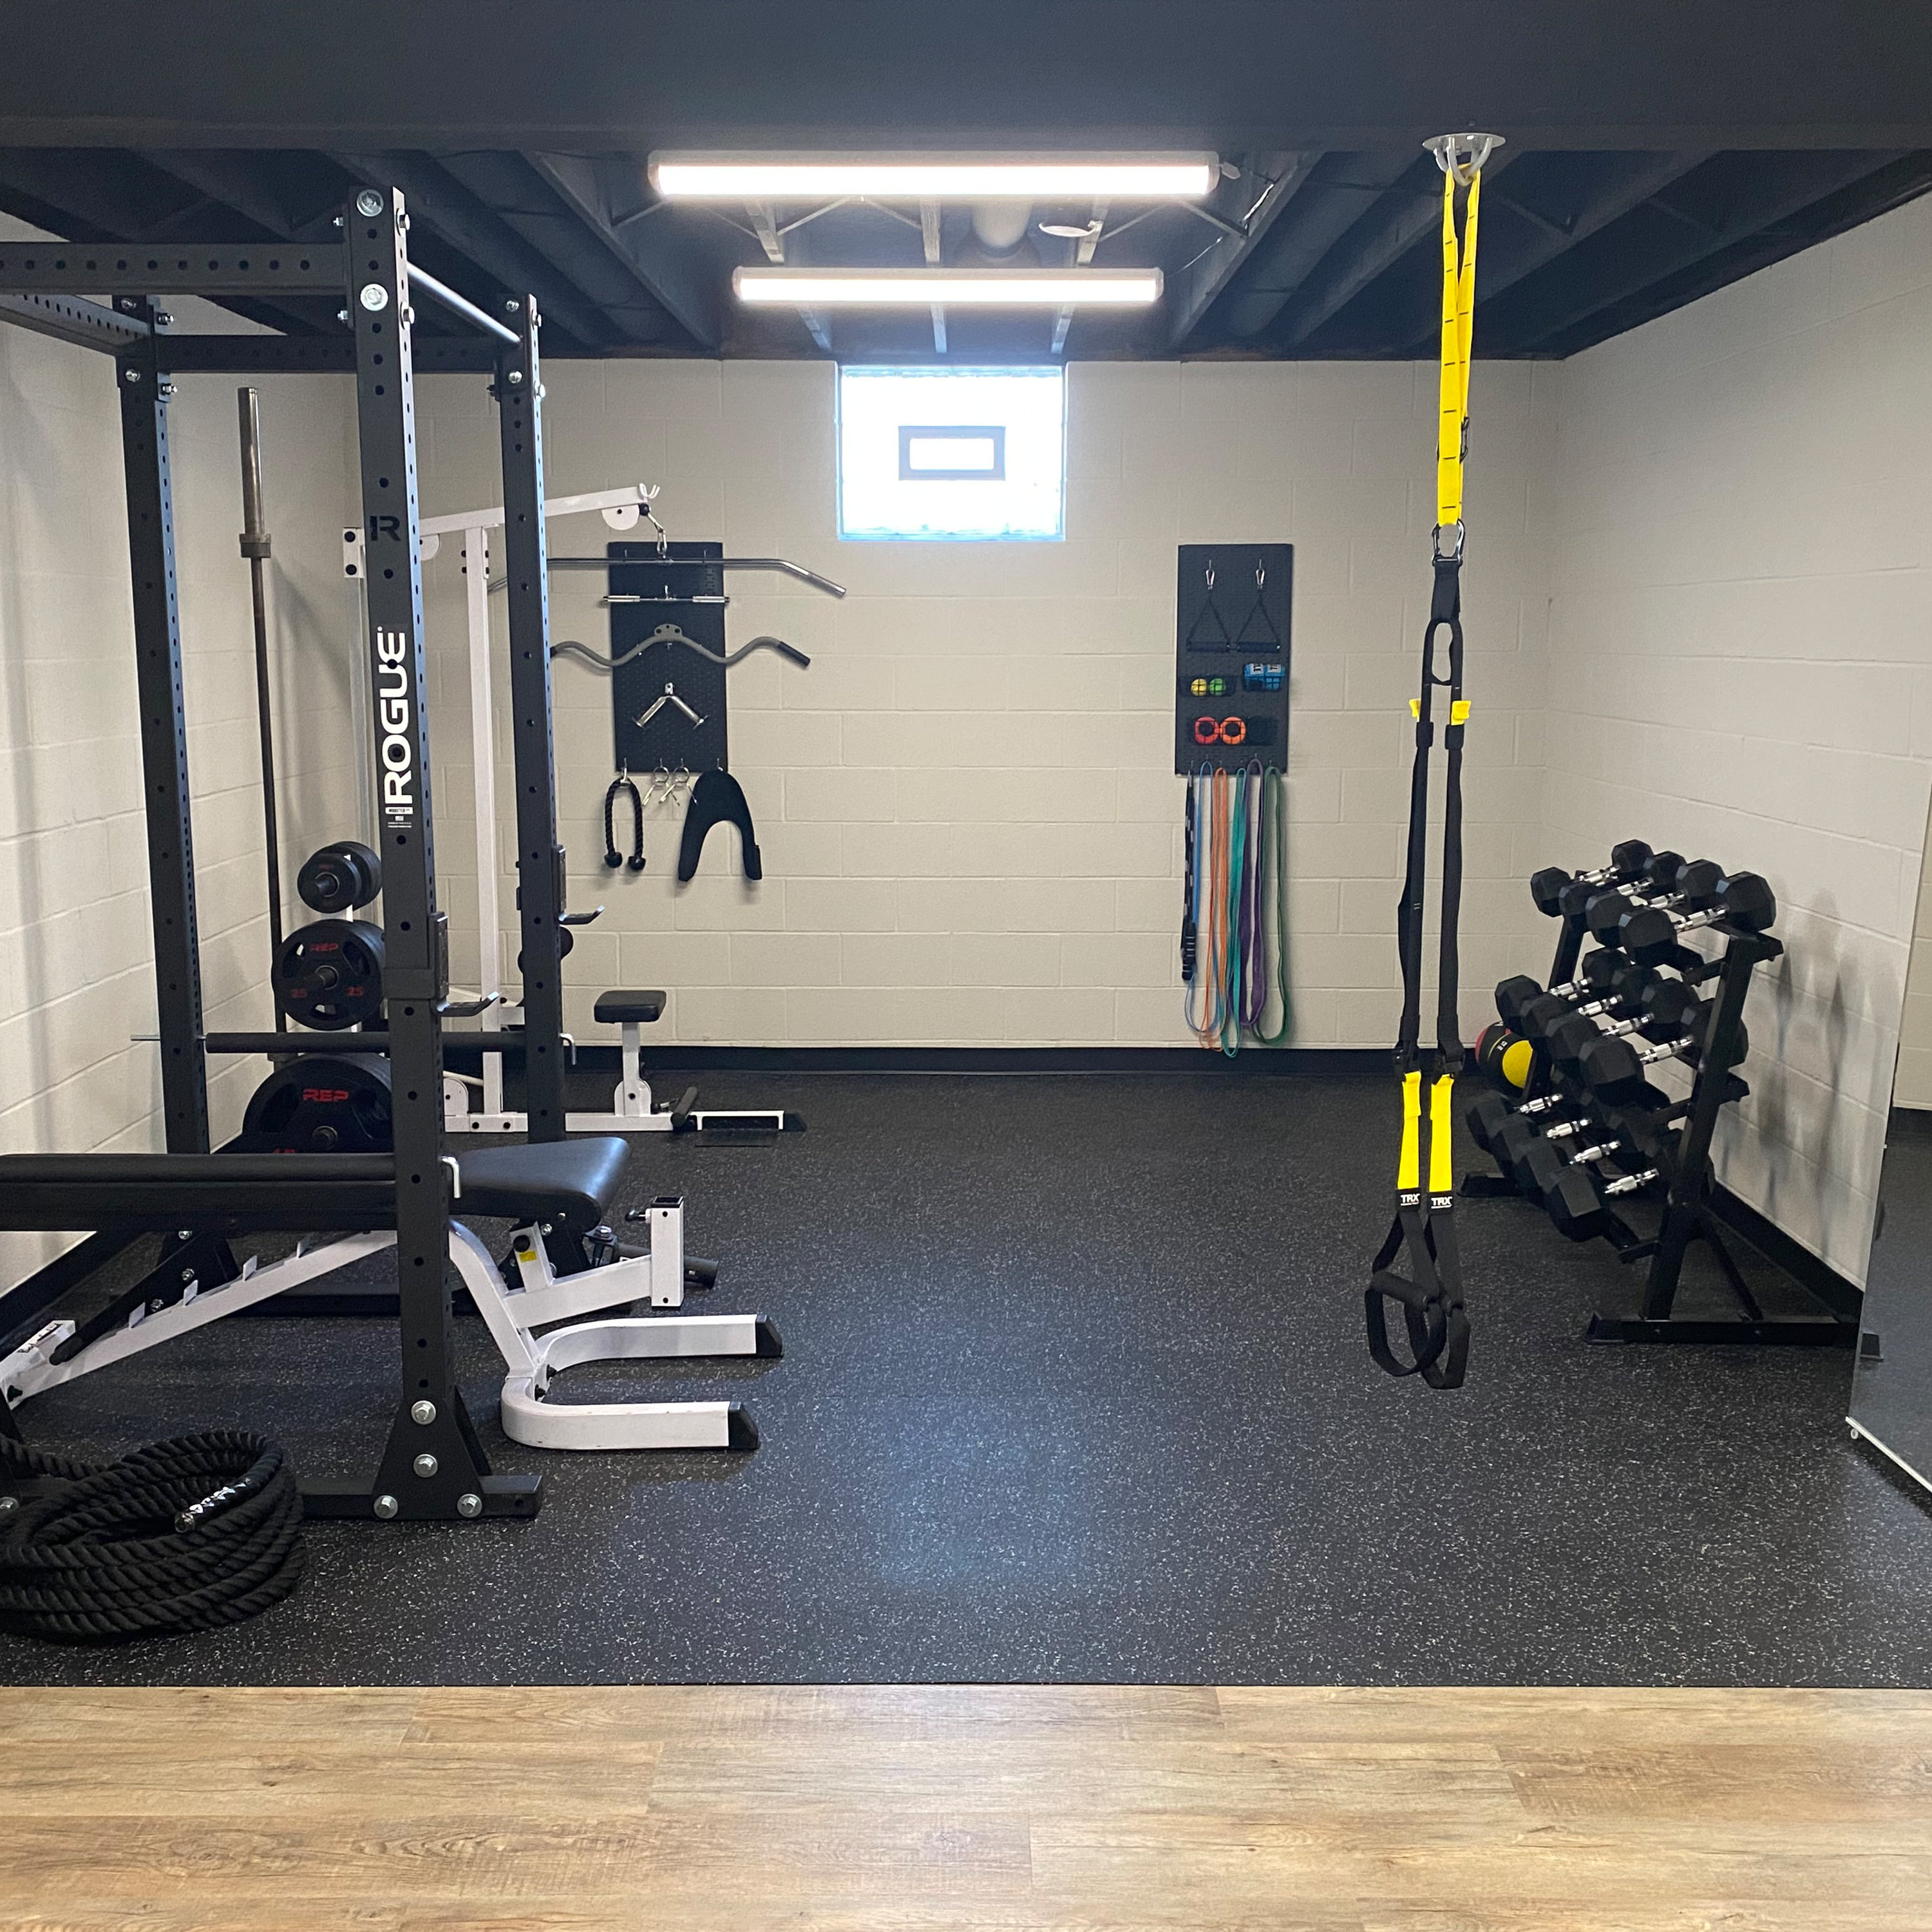 Rubber Flooring for Weight Rooms and Gyms, Utica, NY